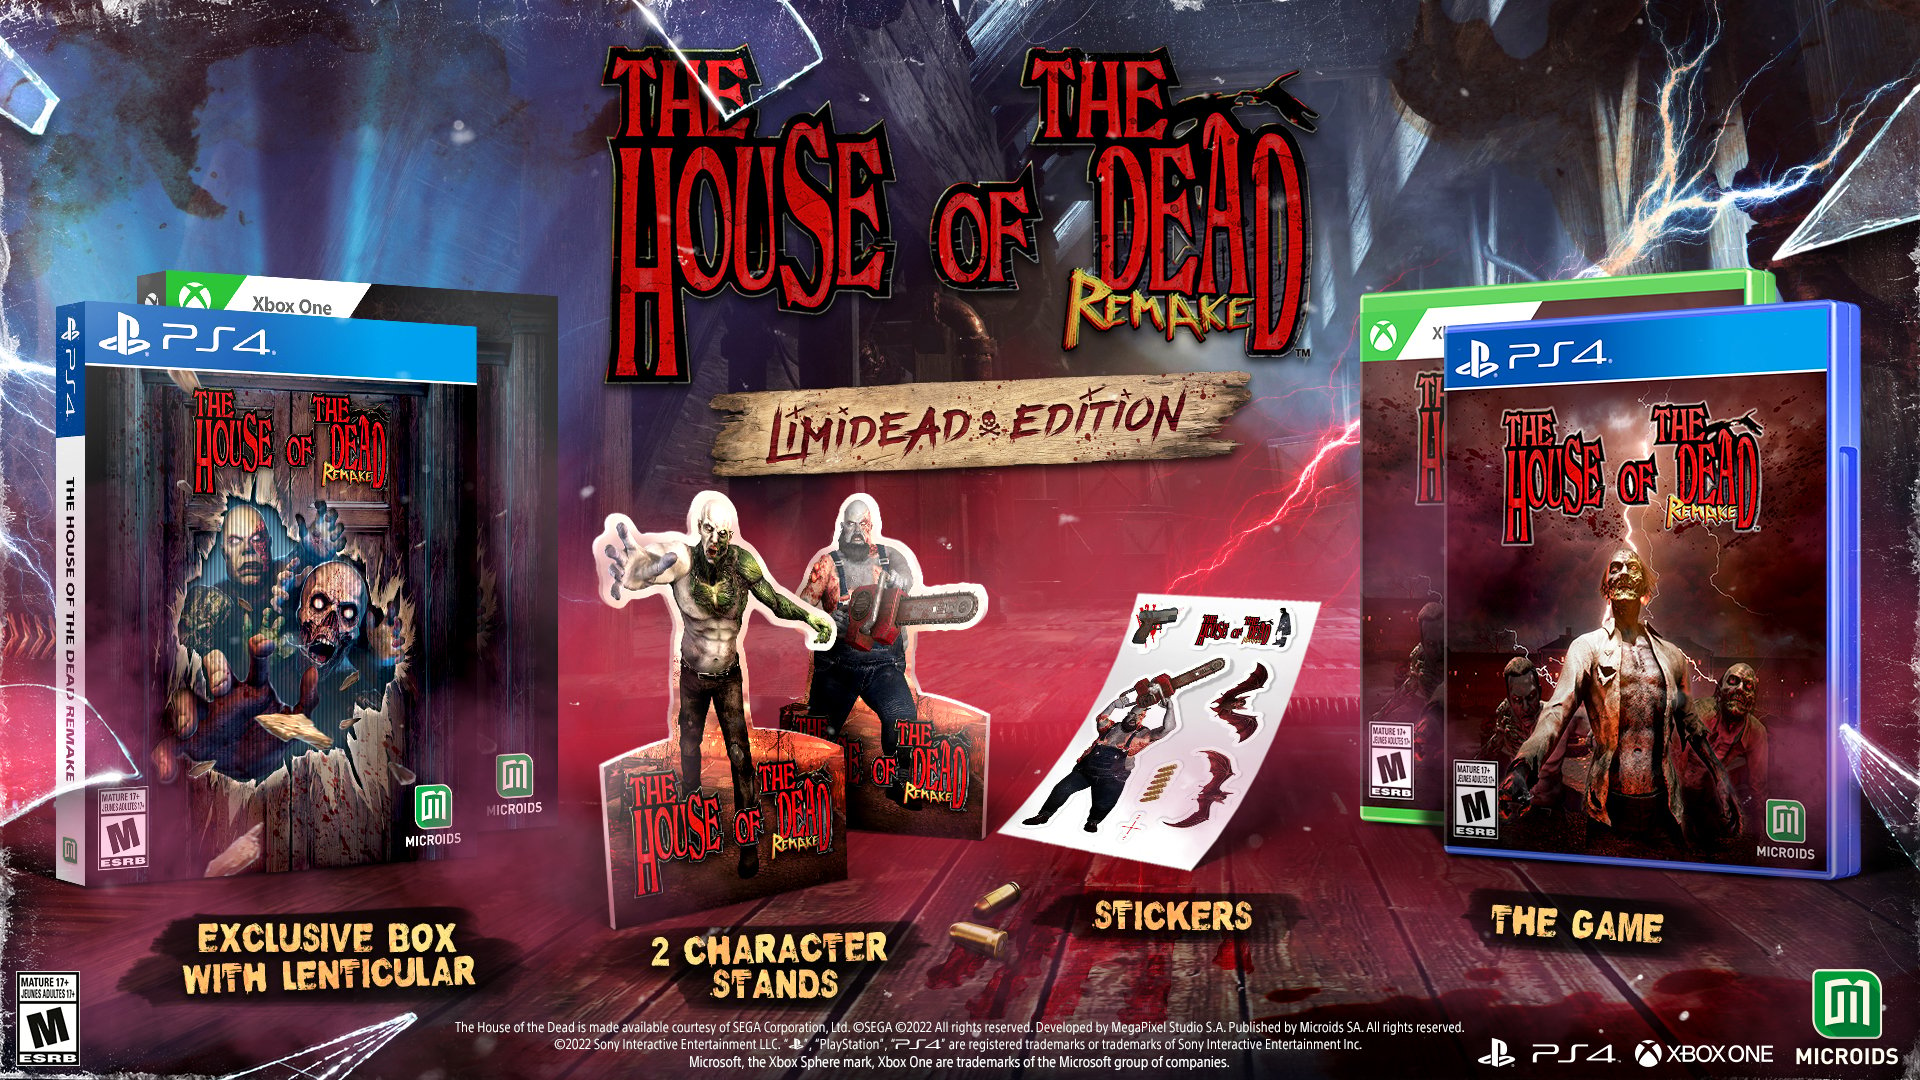 #
      The House of the Dead: Remake ‘Limidead Edition’ coming to PS4, Xbox One in 2022